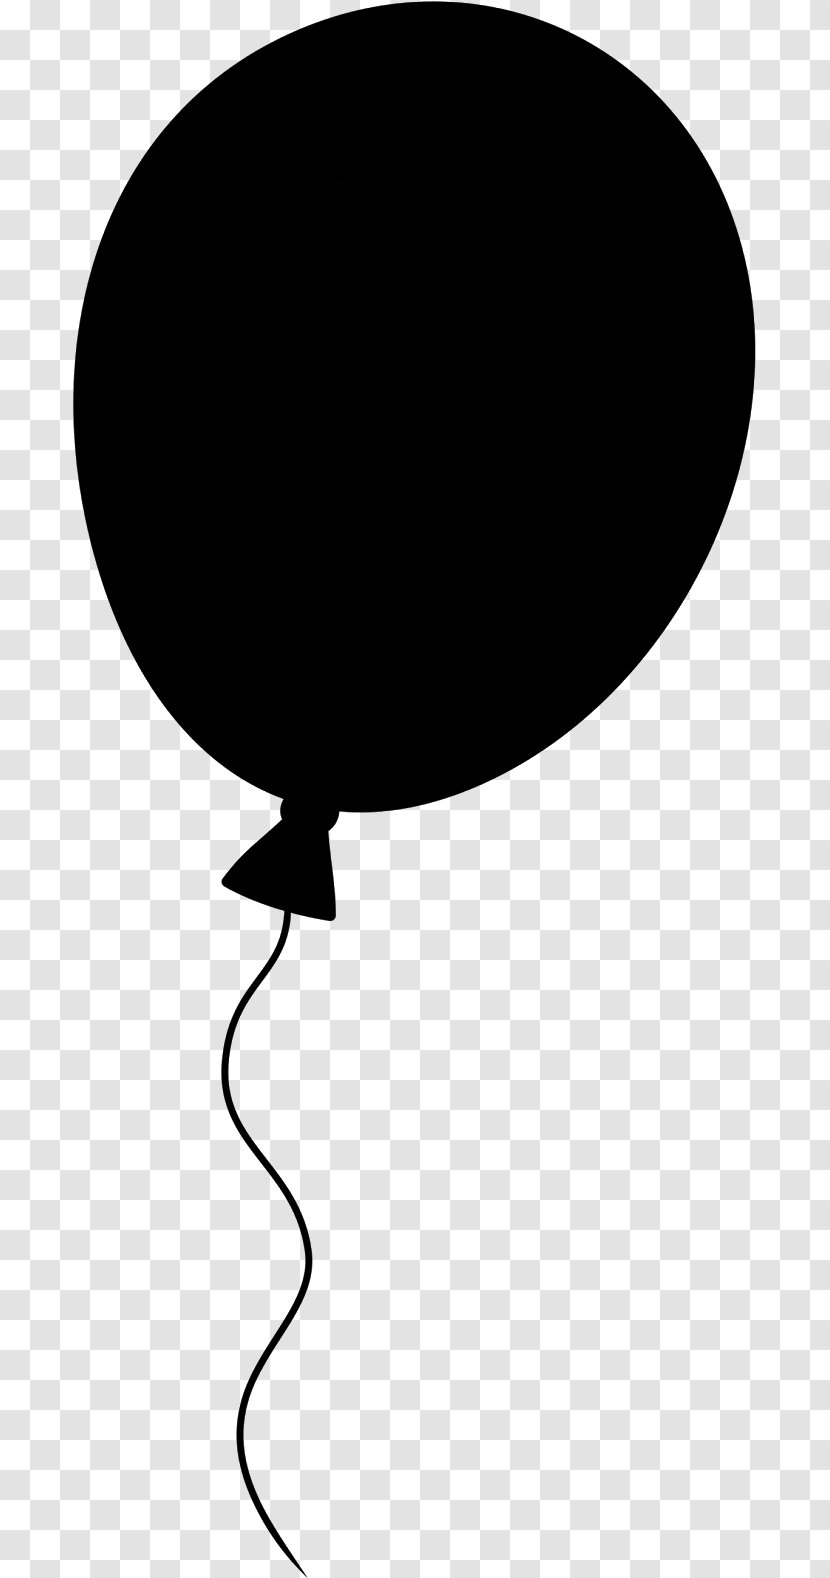 Balloon Silhouette Transparent PNG